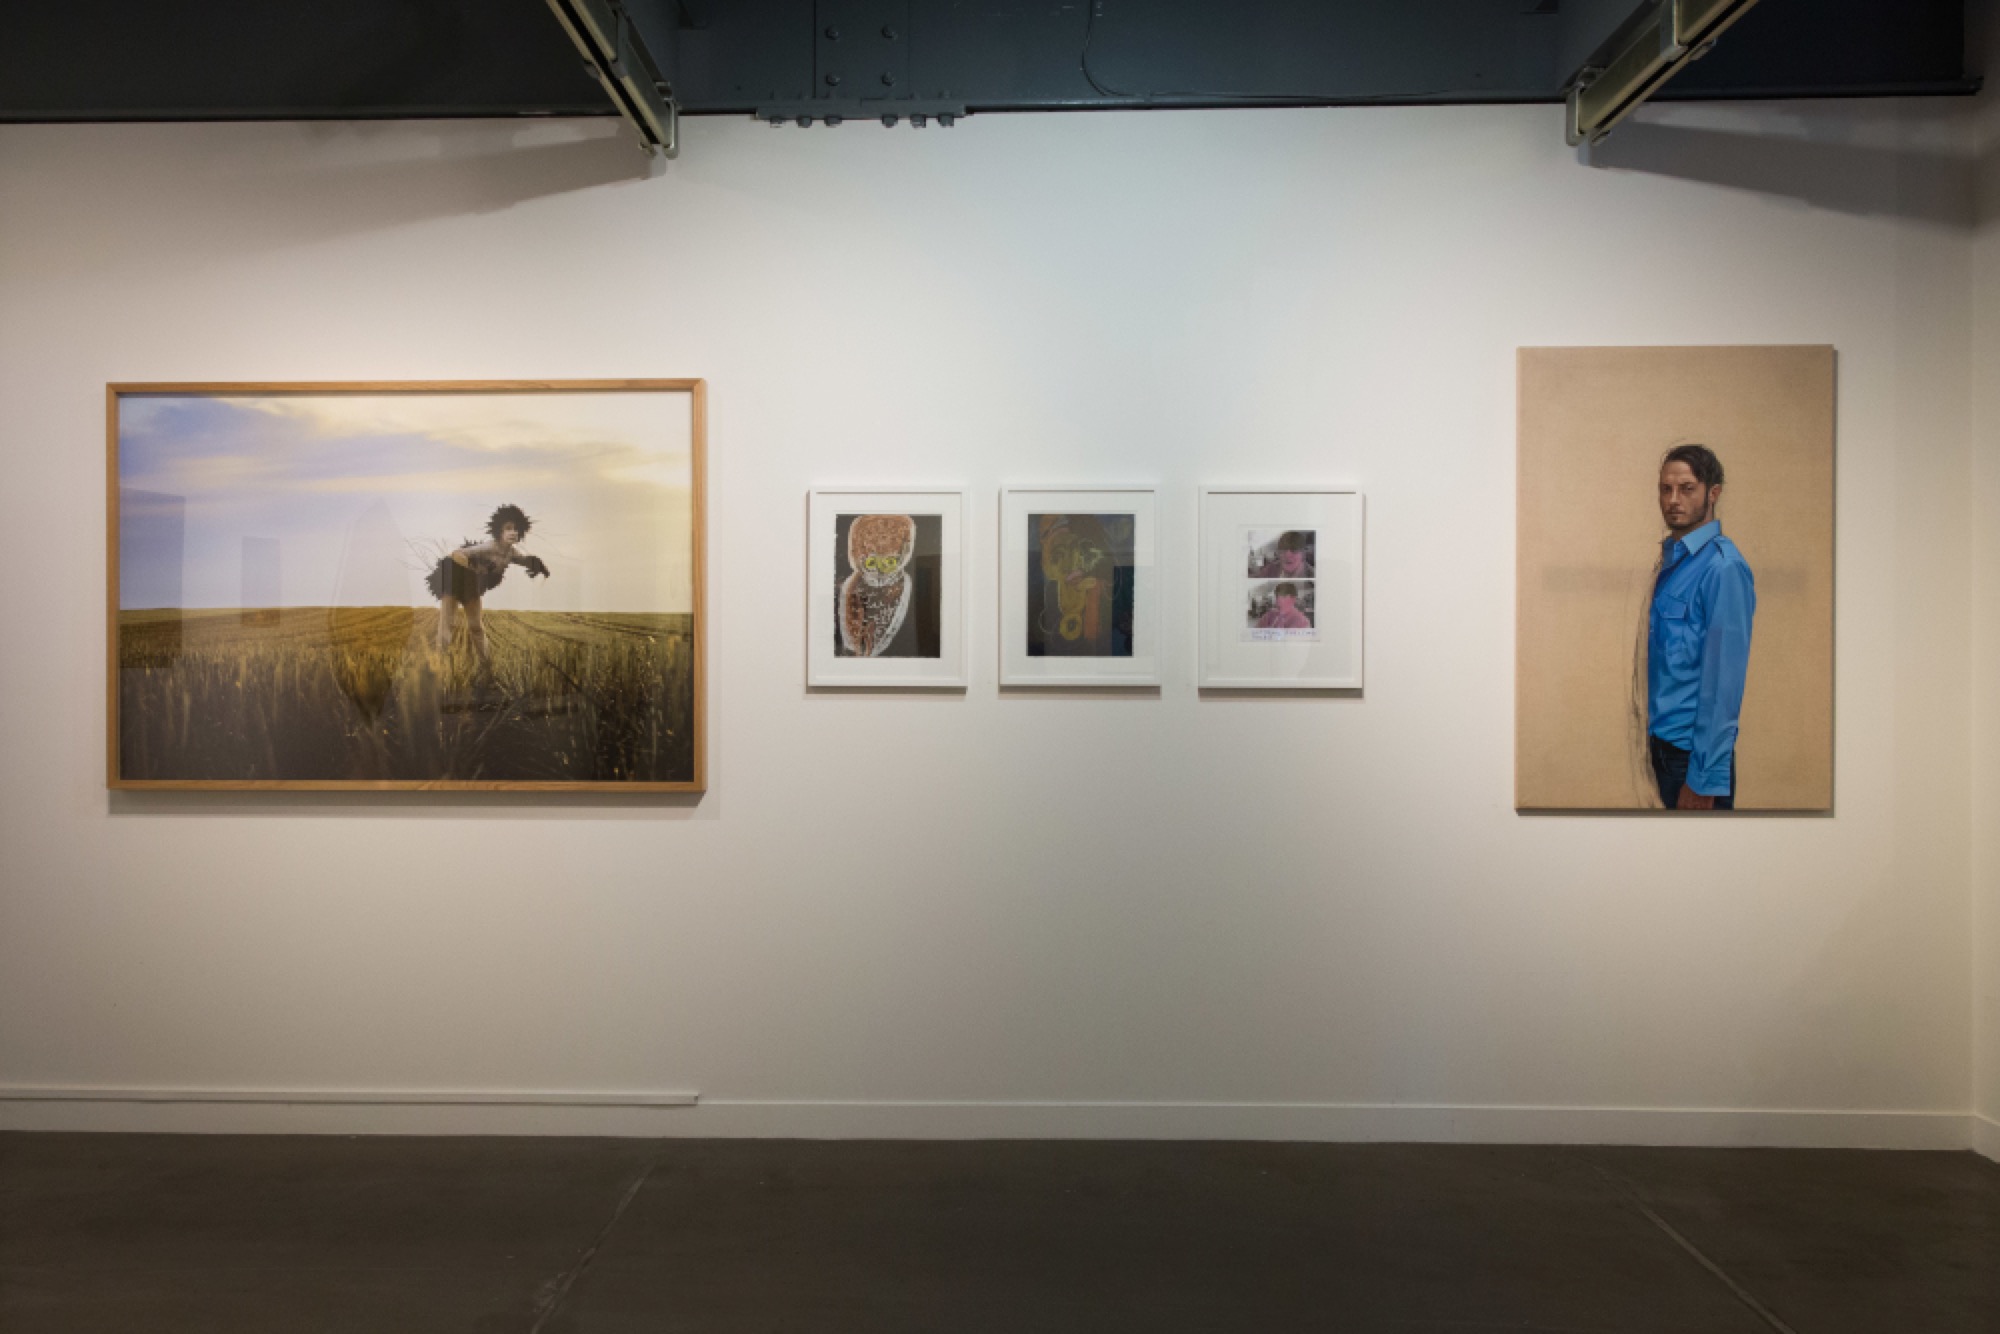 FEM-aFFINITY at Arts Project Australia, 2019. Exhibition image showing works by Jill Orr, Dorothy Berry and Yvette Coppersmith. Photo by Kate Longley.